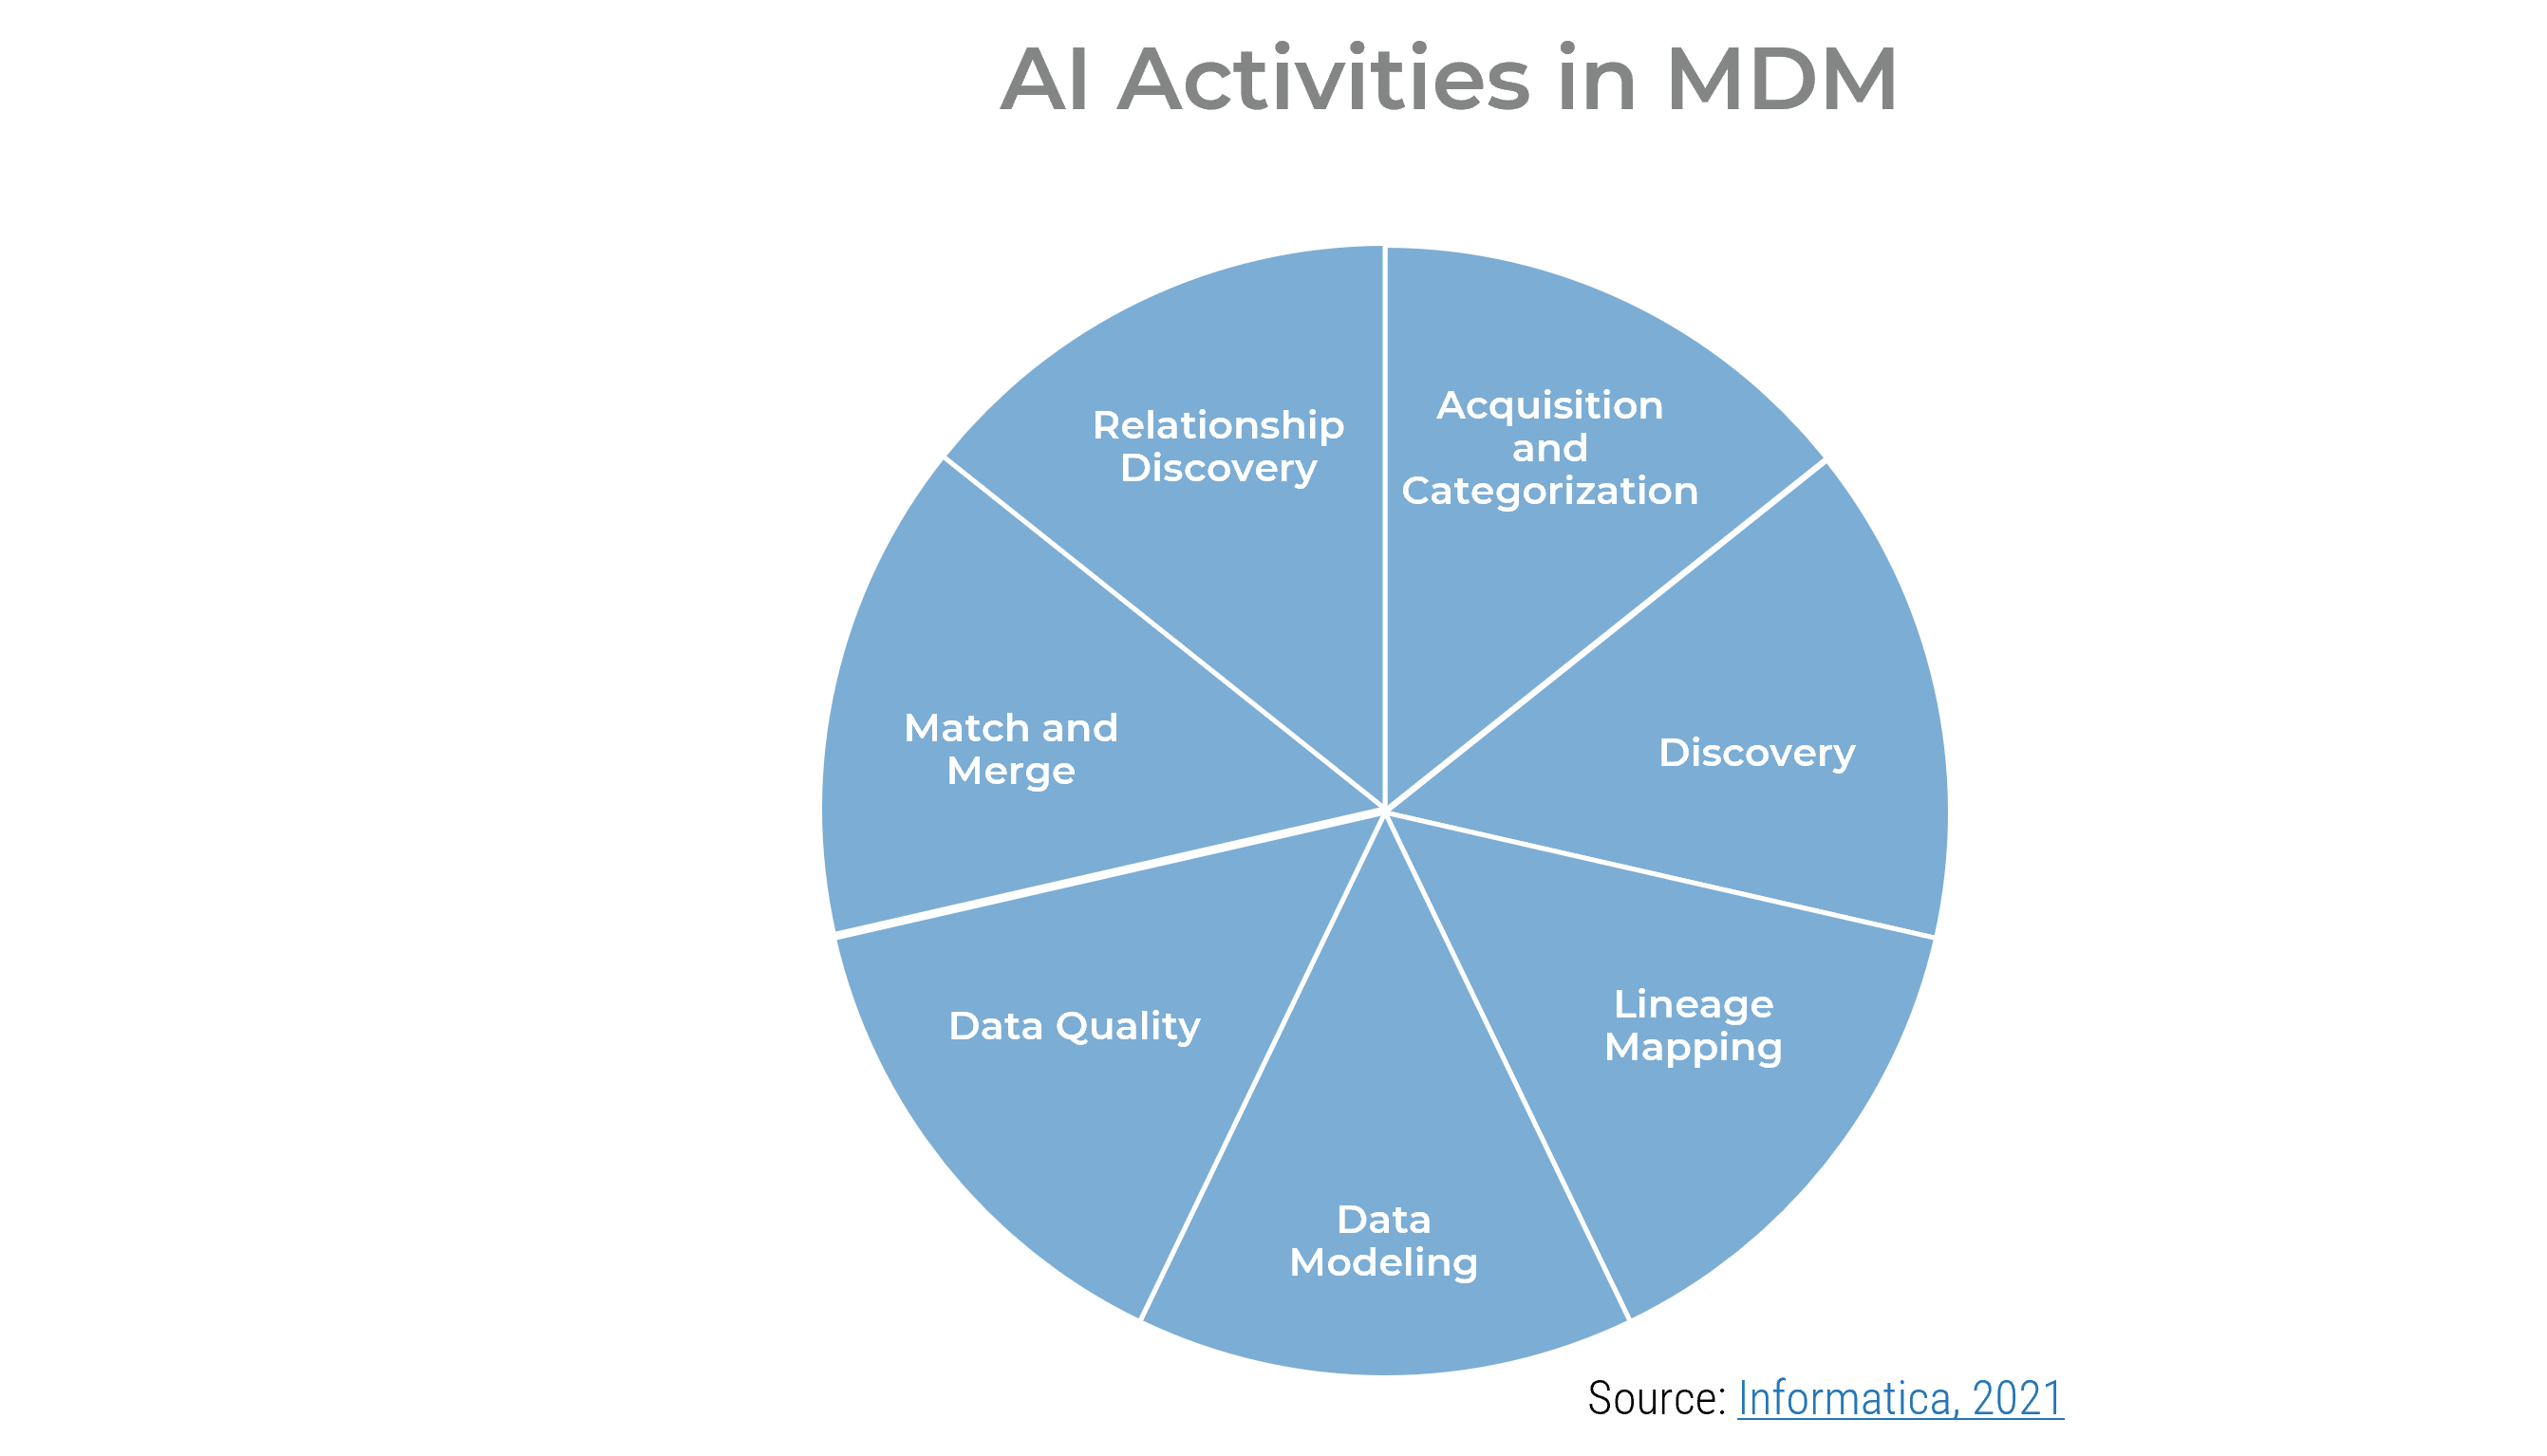 The image contains a screenshot of the AI Activities in MDM.